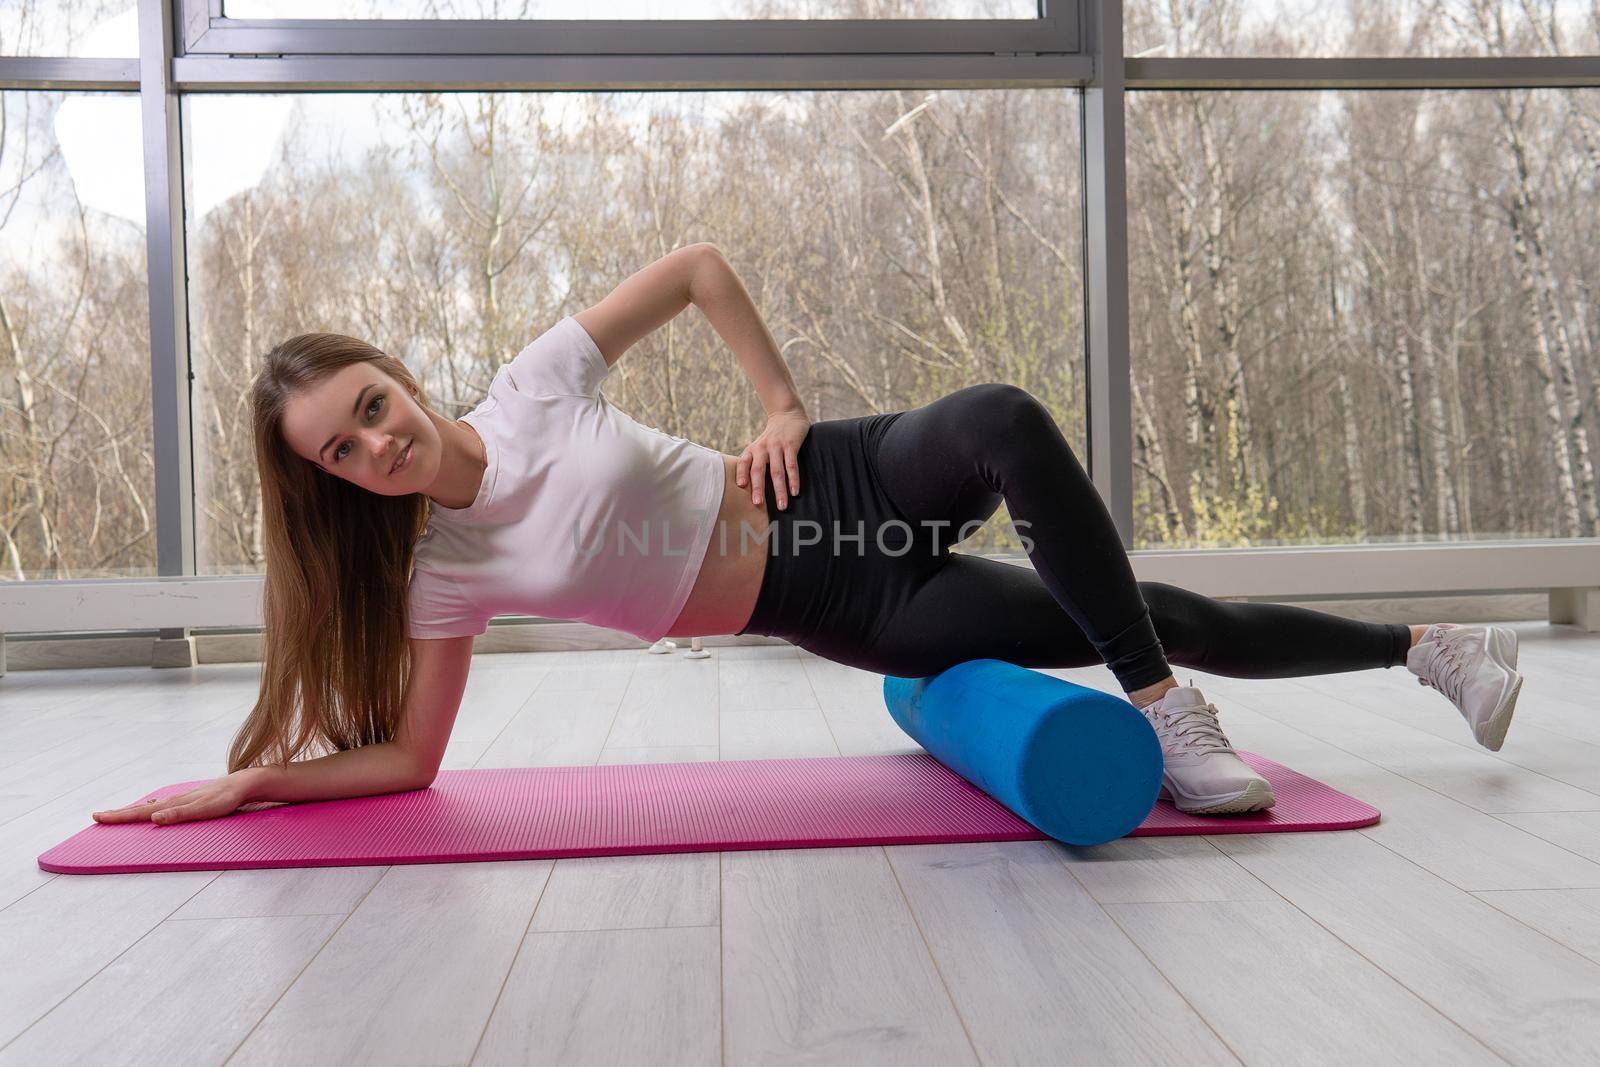 The fitness mfr the roller lies girl on red mat mfr strength, for fit cheerful from female and lifestyle workout, girl sporty. Gymnastics position leg, practicing pose by 89167702191